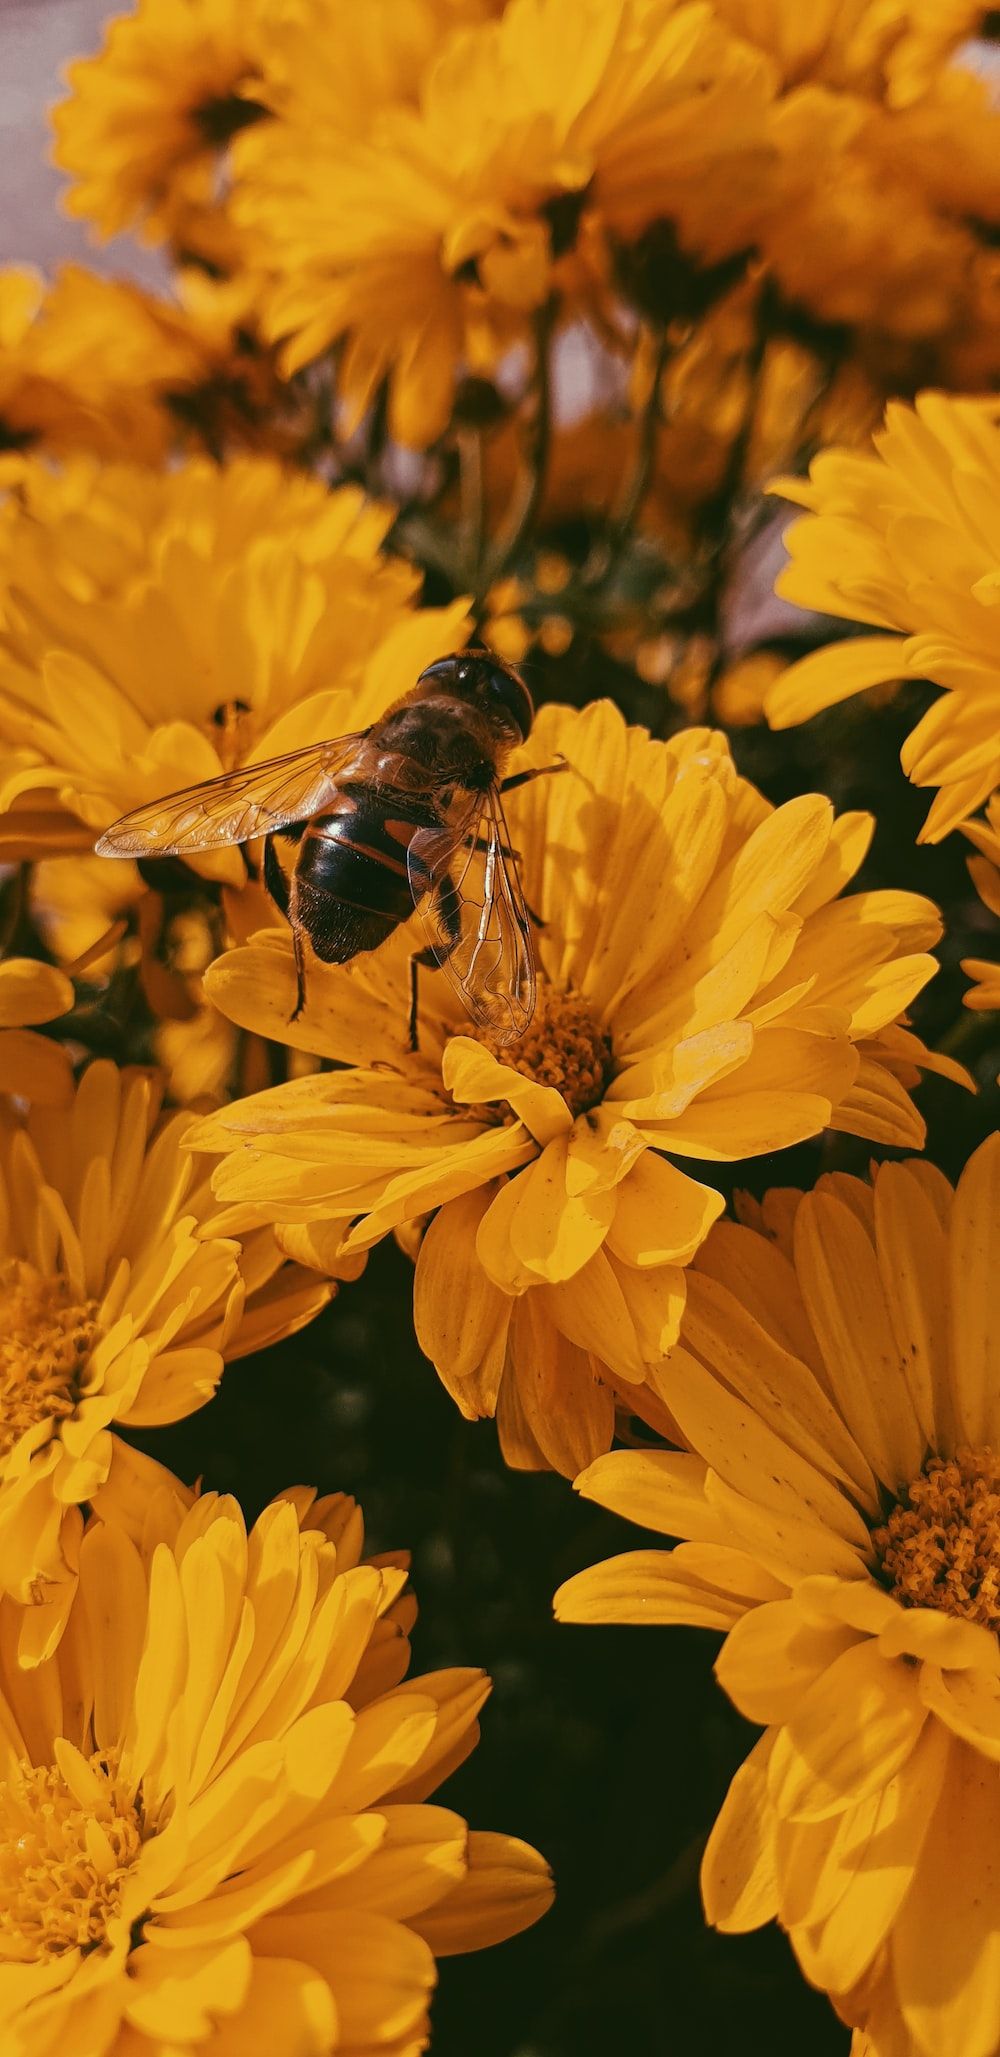 A bee sitting on a yellow flower - Bee